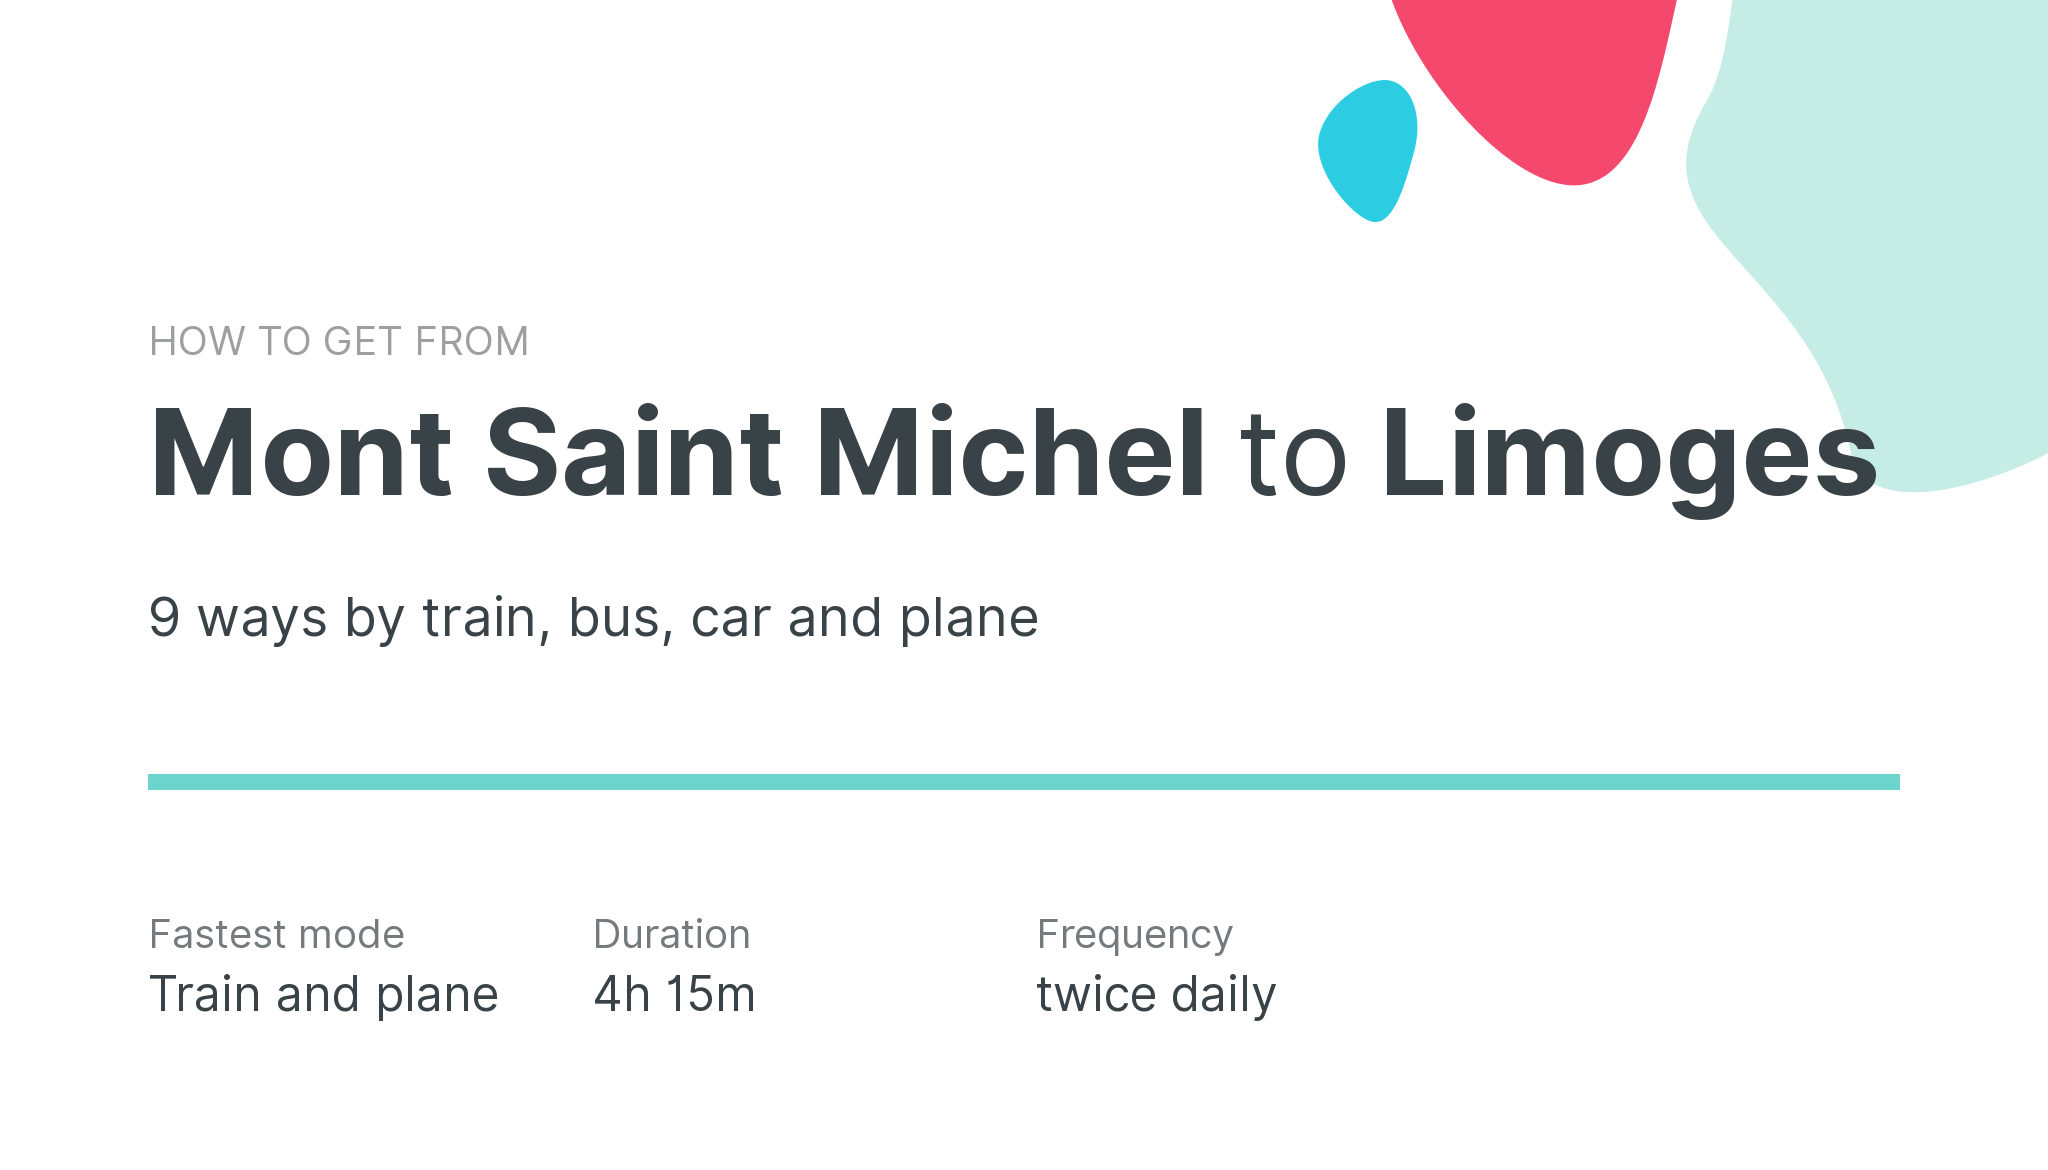 How do I get from Mont Saint Michel to Limoges